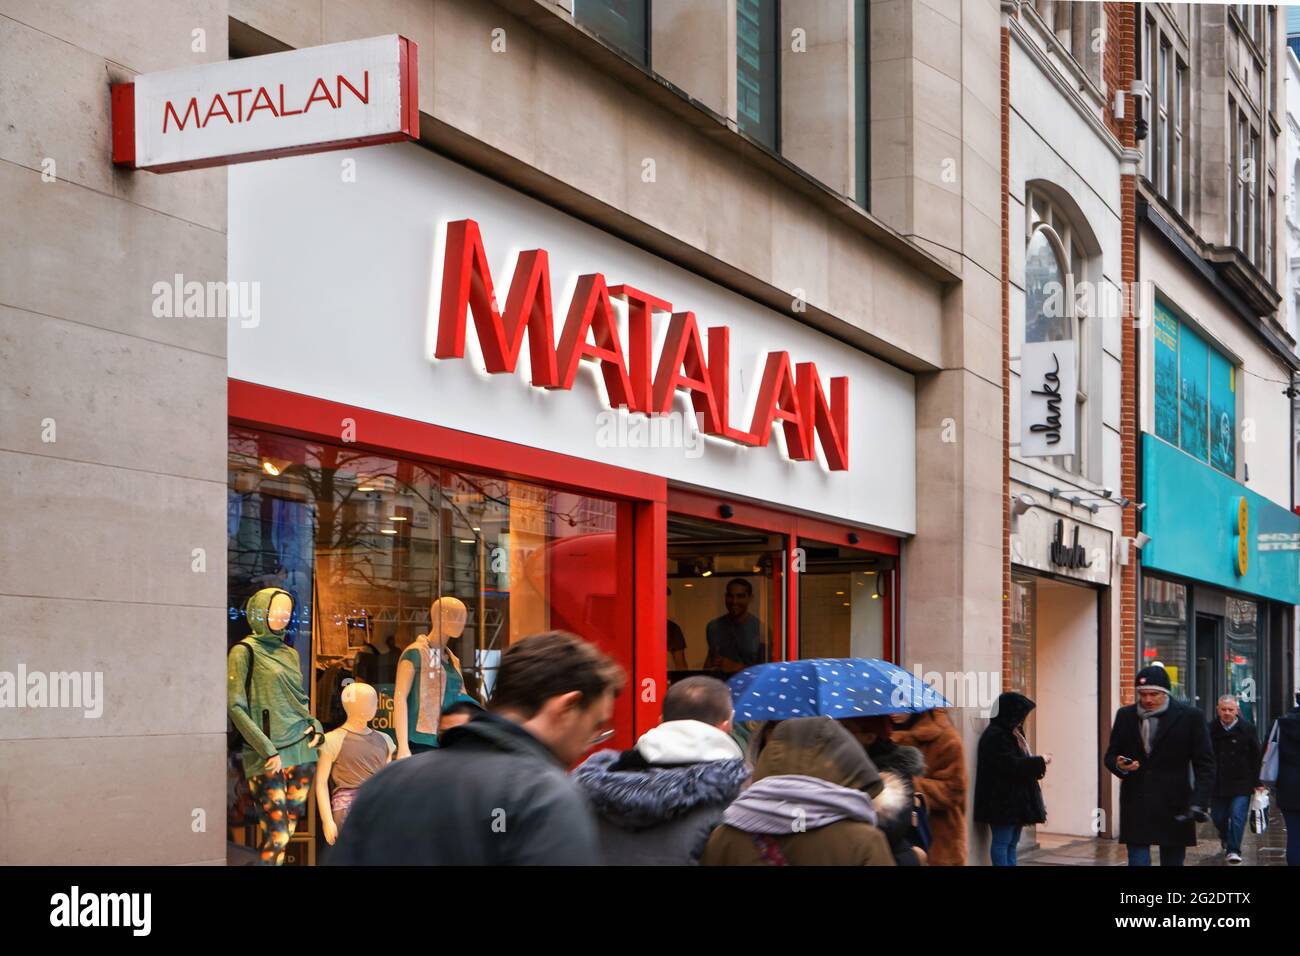 London, United Kingdom - February 01, 2019: People walking in front of Matalan store on Oxford Street entrance with bright red logo. It is British fas Stock Photo